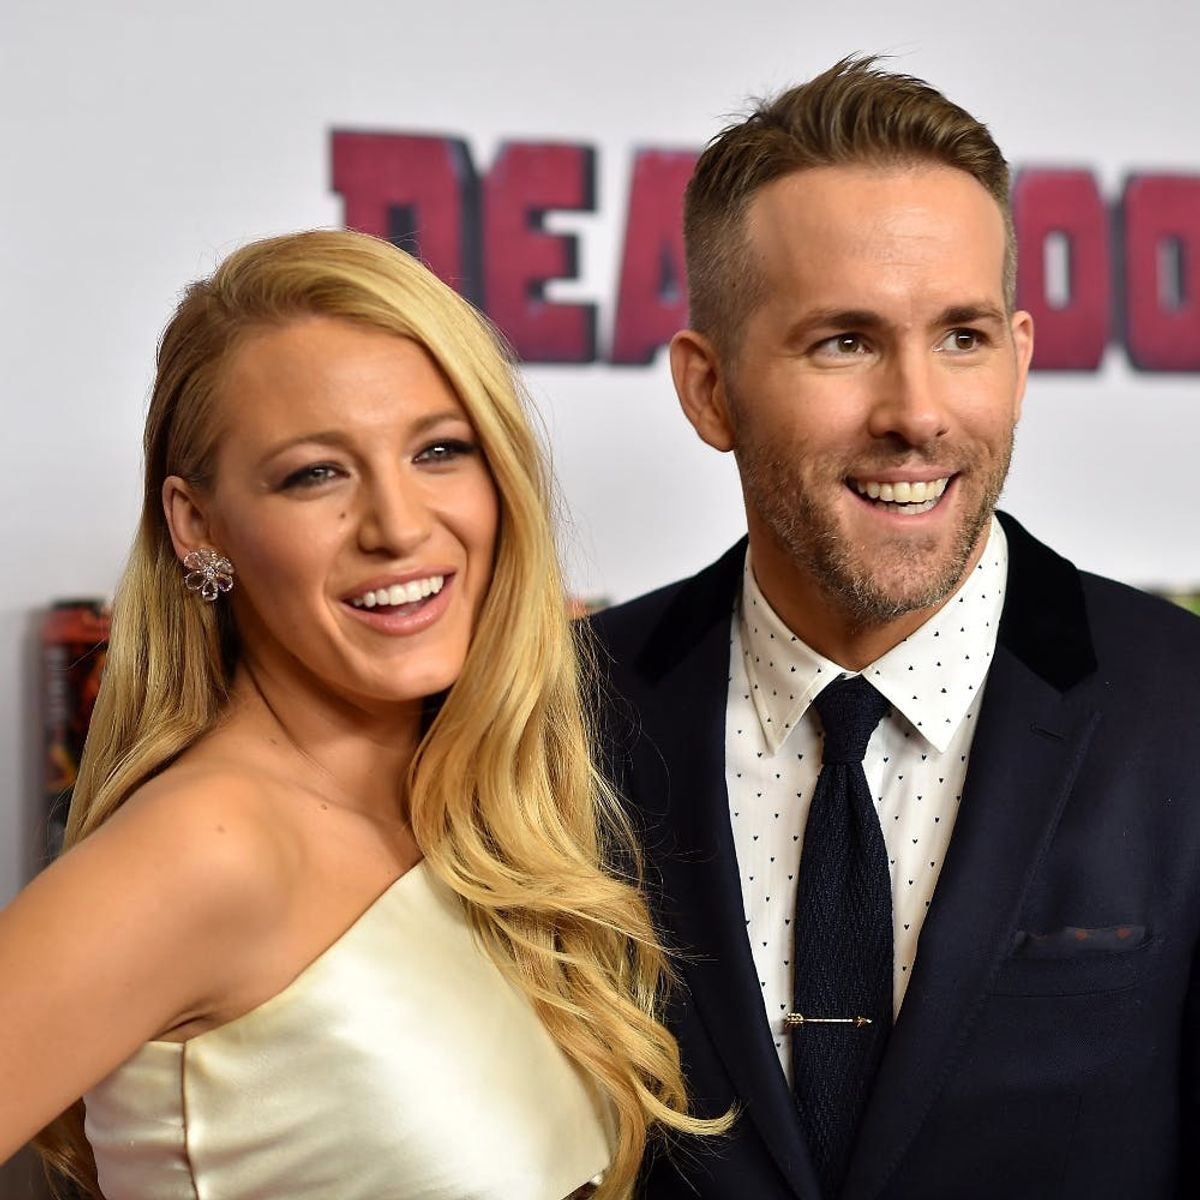 Blake Lively and Ryan Reynolds’ Kids Just Made Their Public Debut